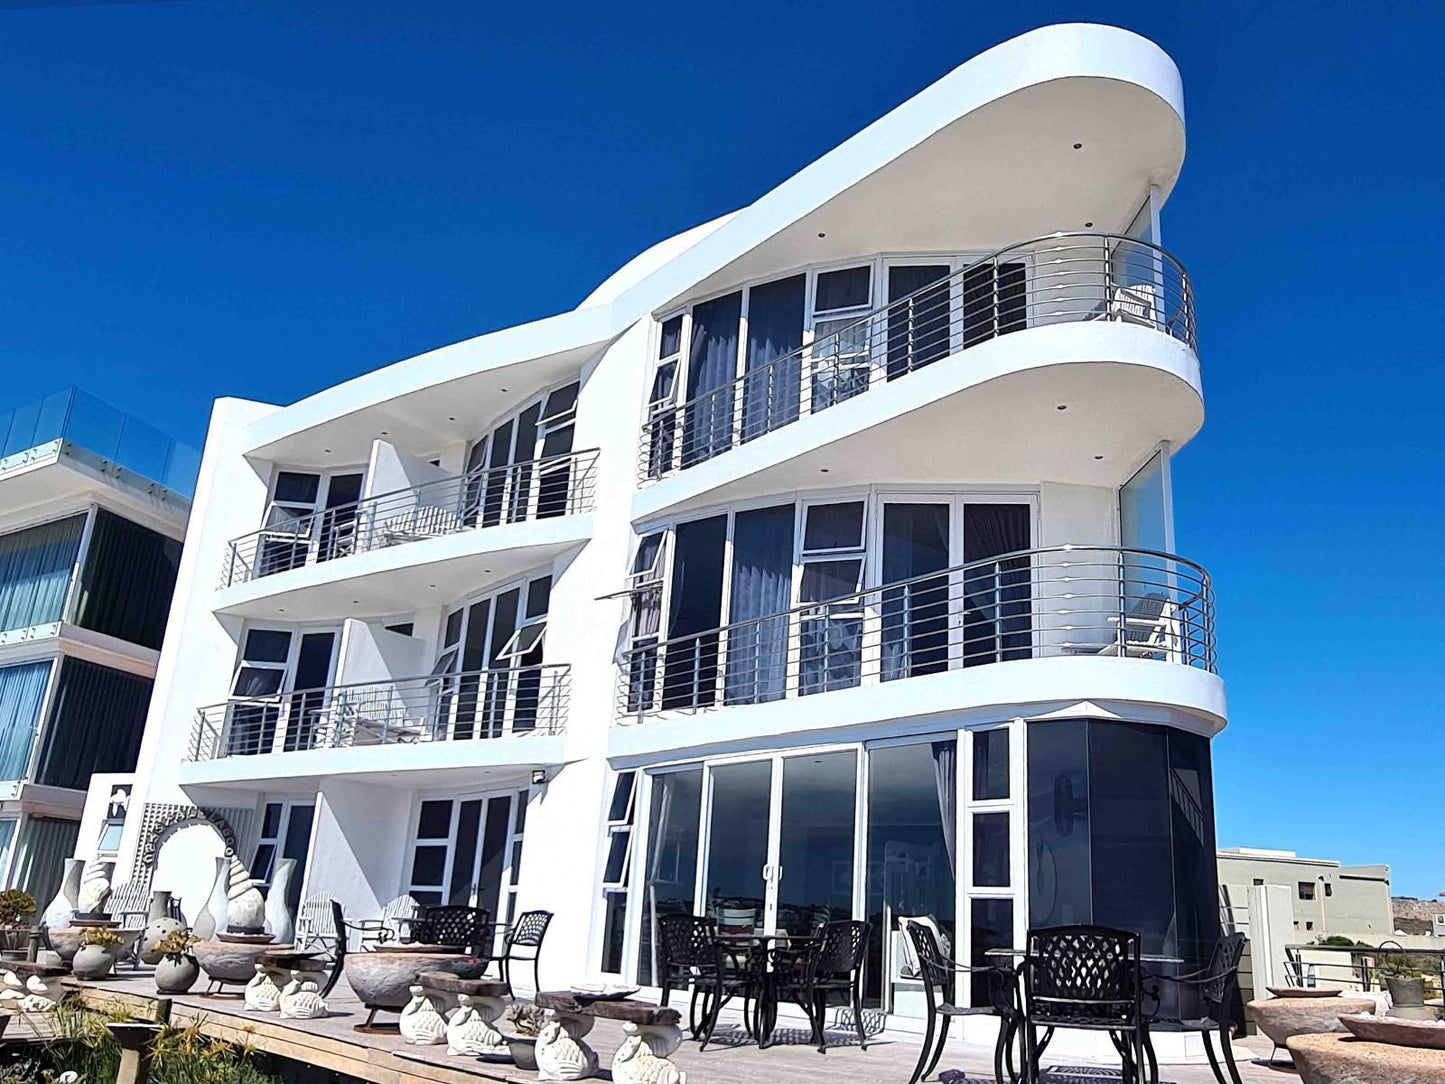 Crystal Lagoon Lodge Calypso Beach Langebaan Western Cape South Africa Balcony, Architecture, Building, House, Ship, Vehicle